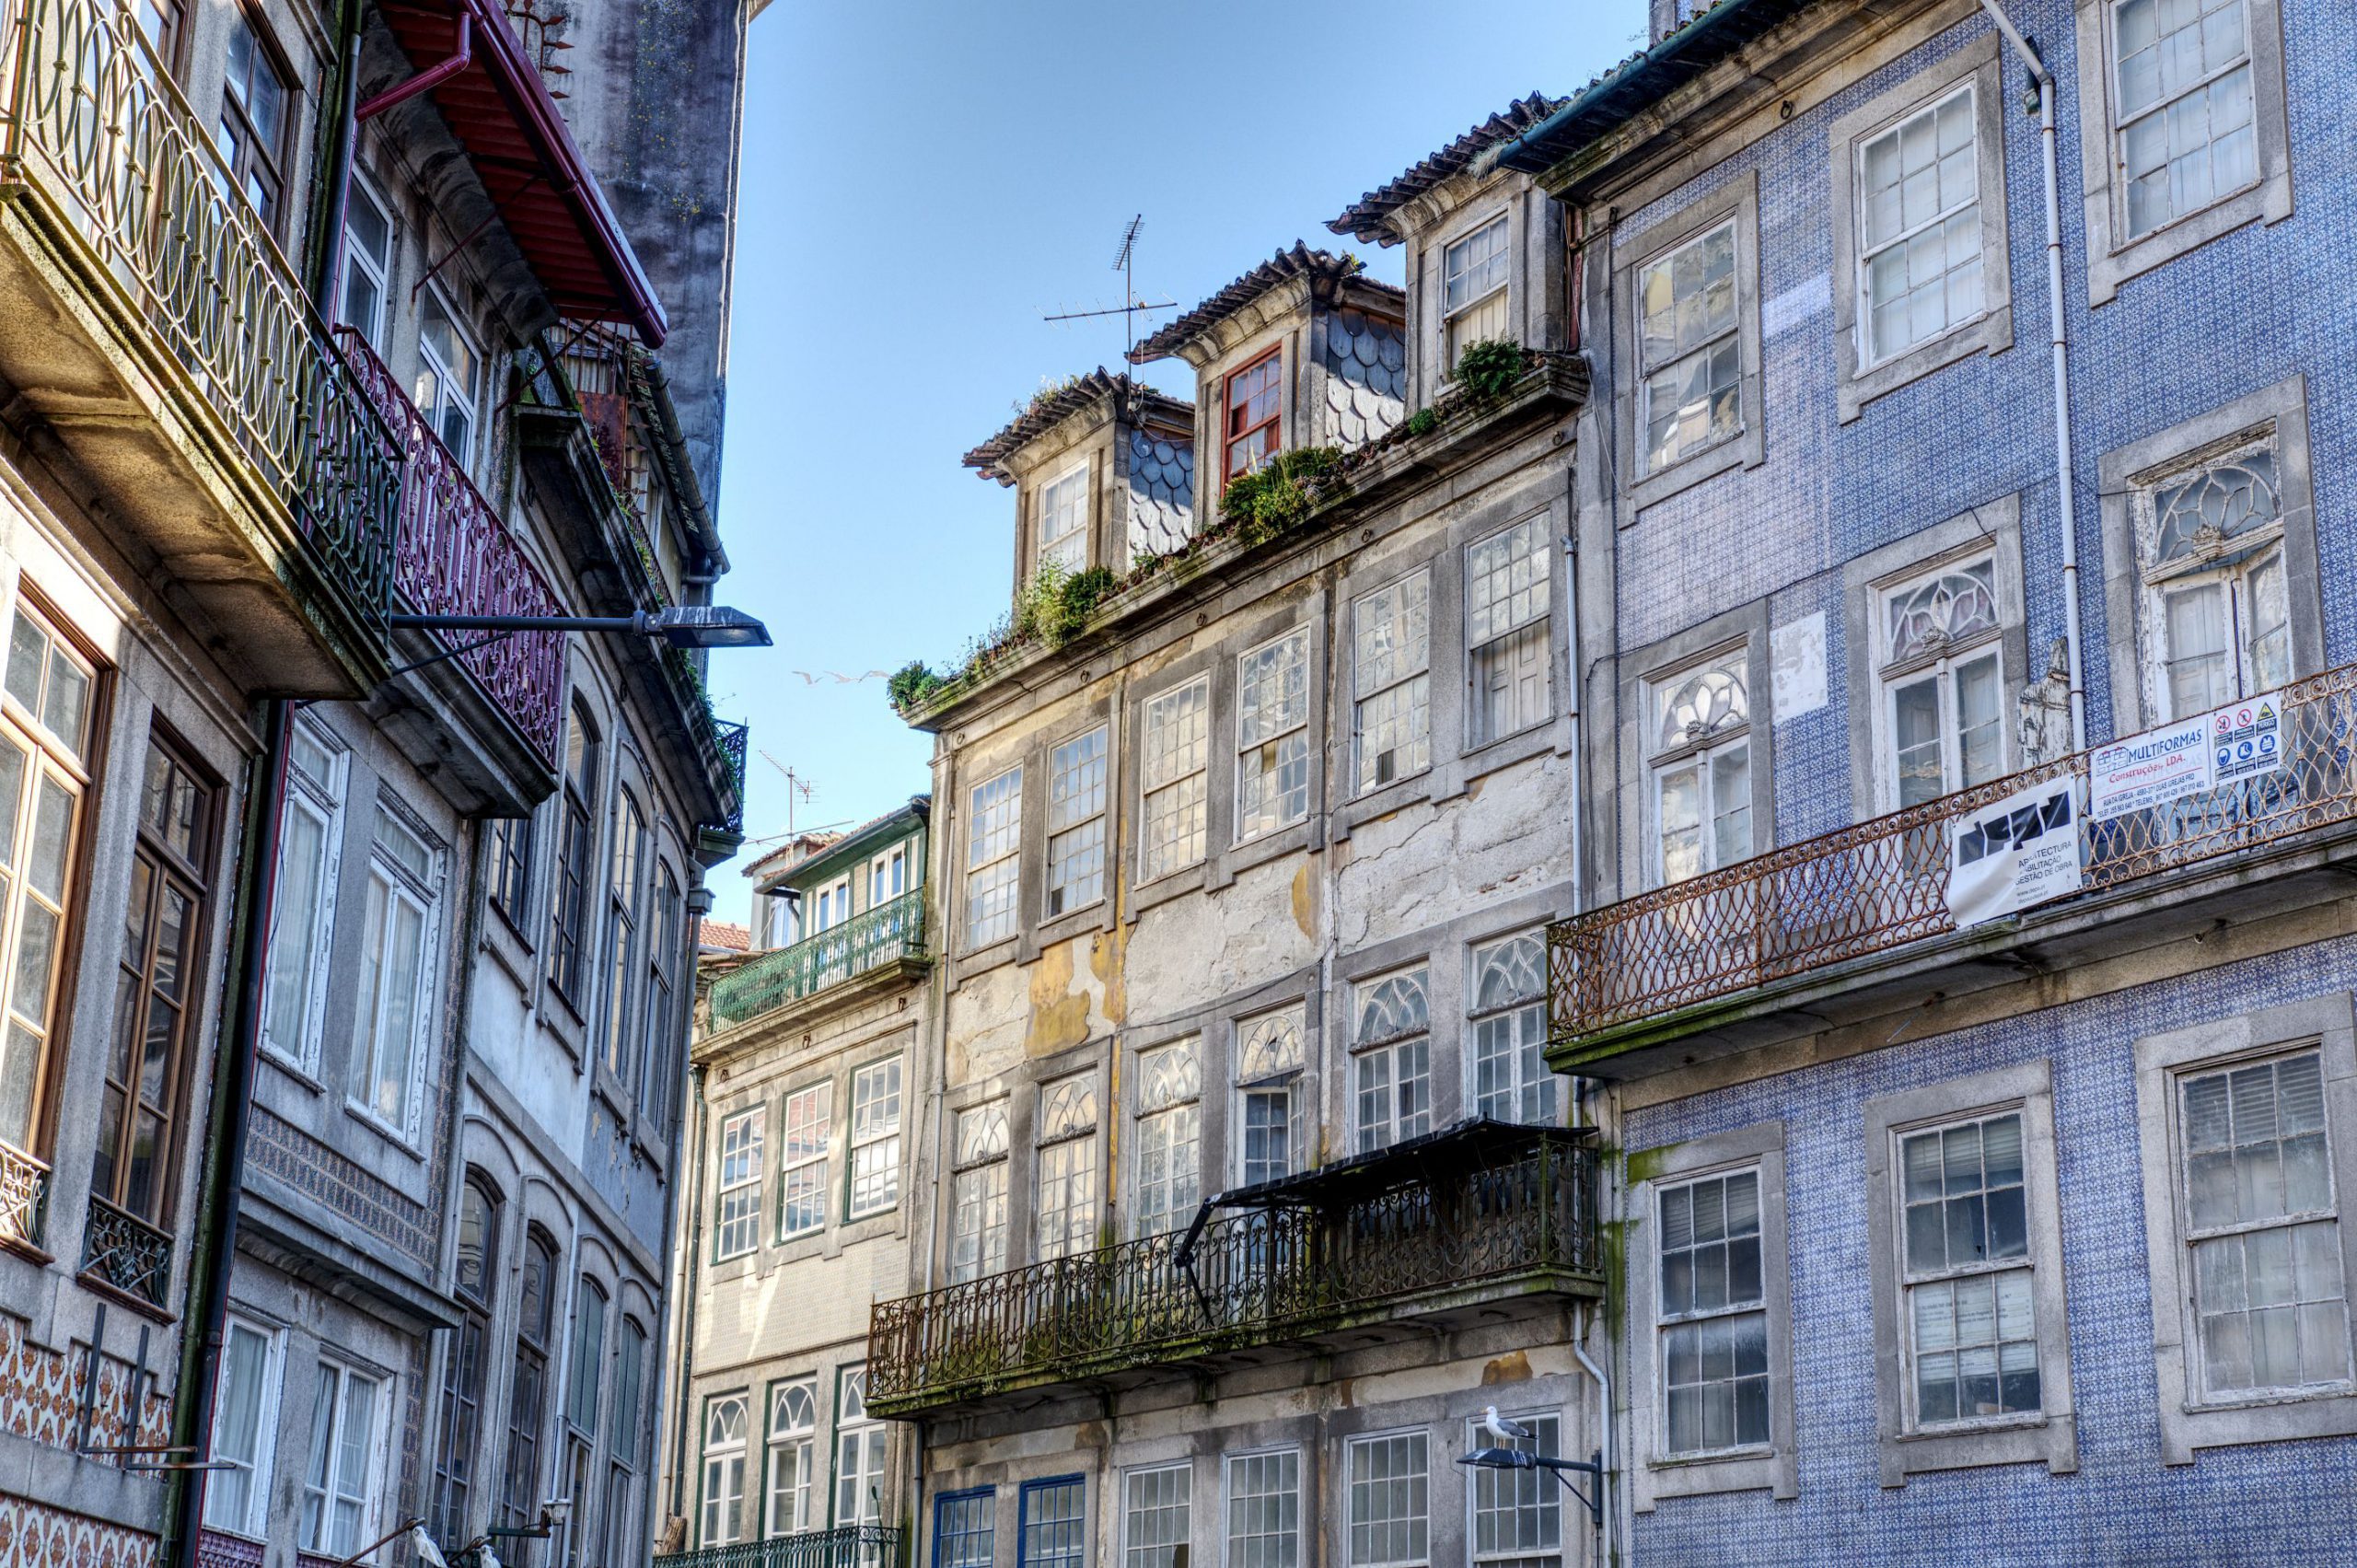 Historic house fronts in Porto's Old Town